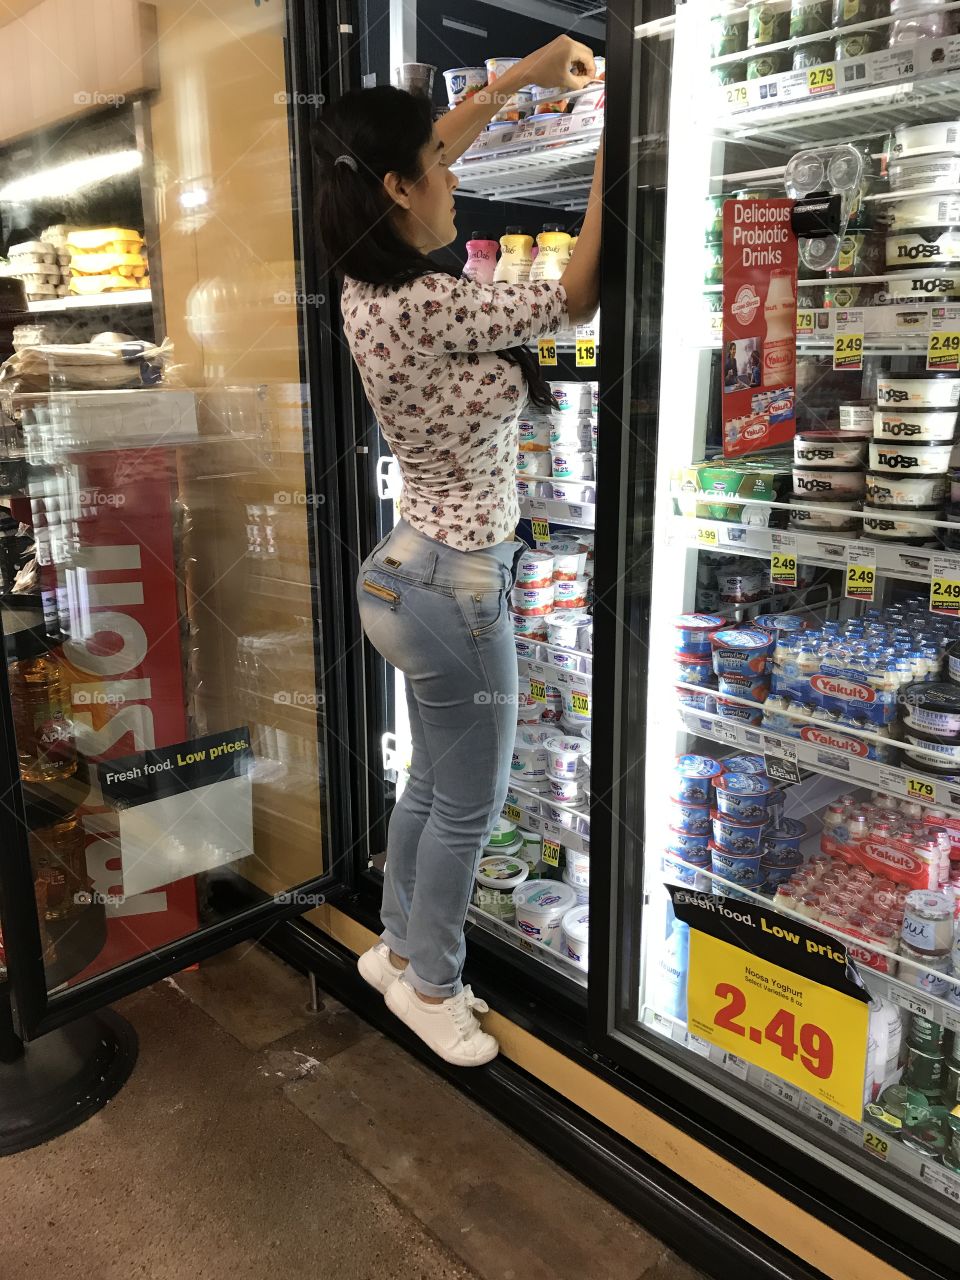 Side view of woman arranging diary products in the refrigerator